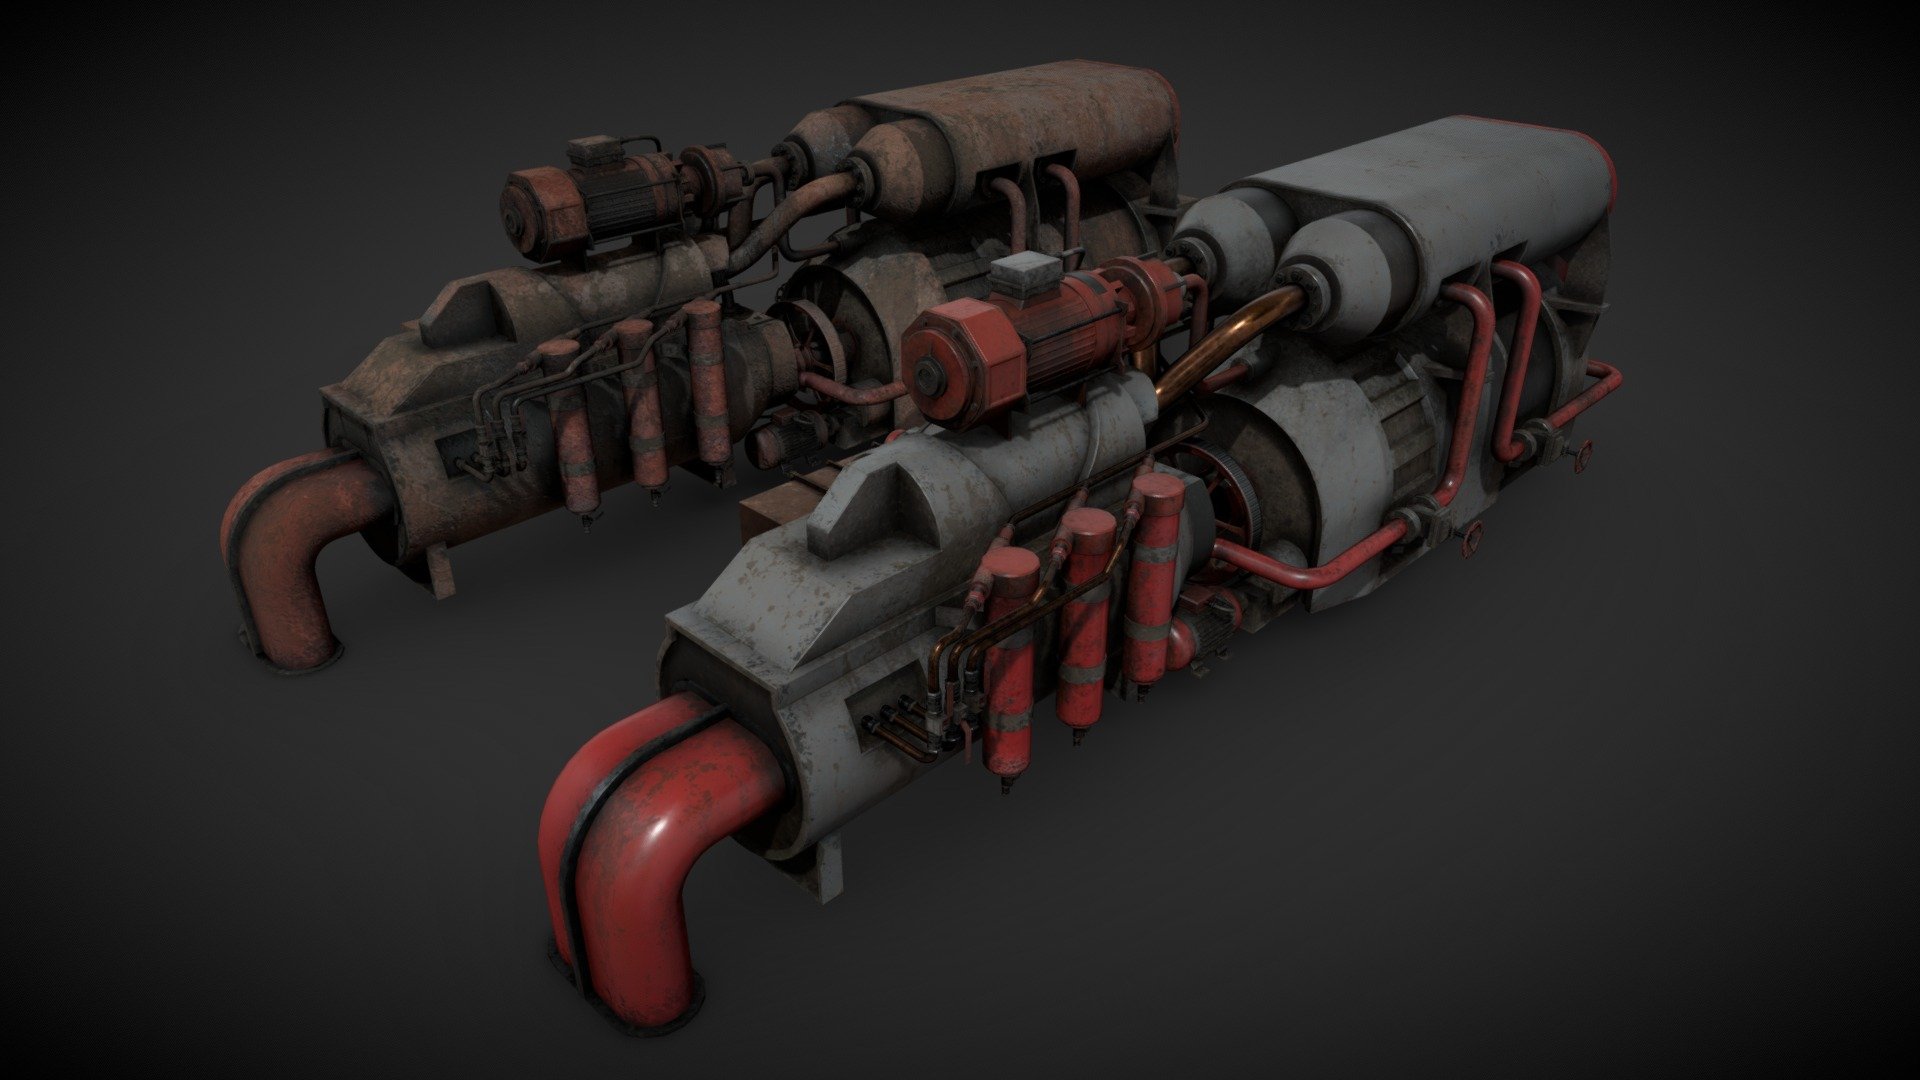 Machinery device for industrial visualizations.
4k PBR PNG textures included 3d model